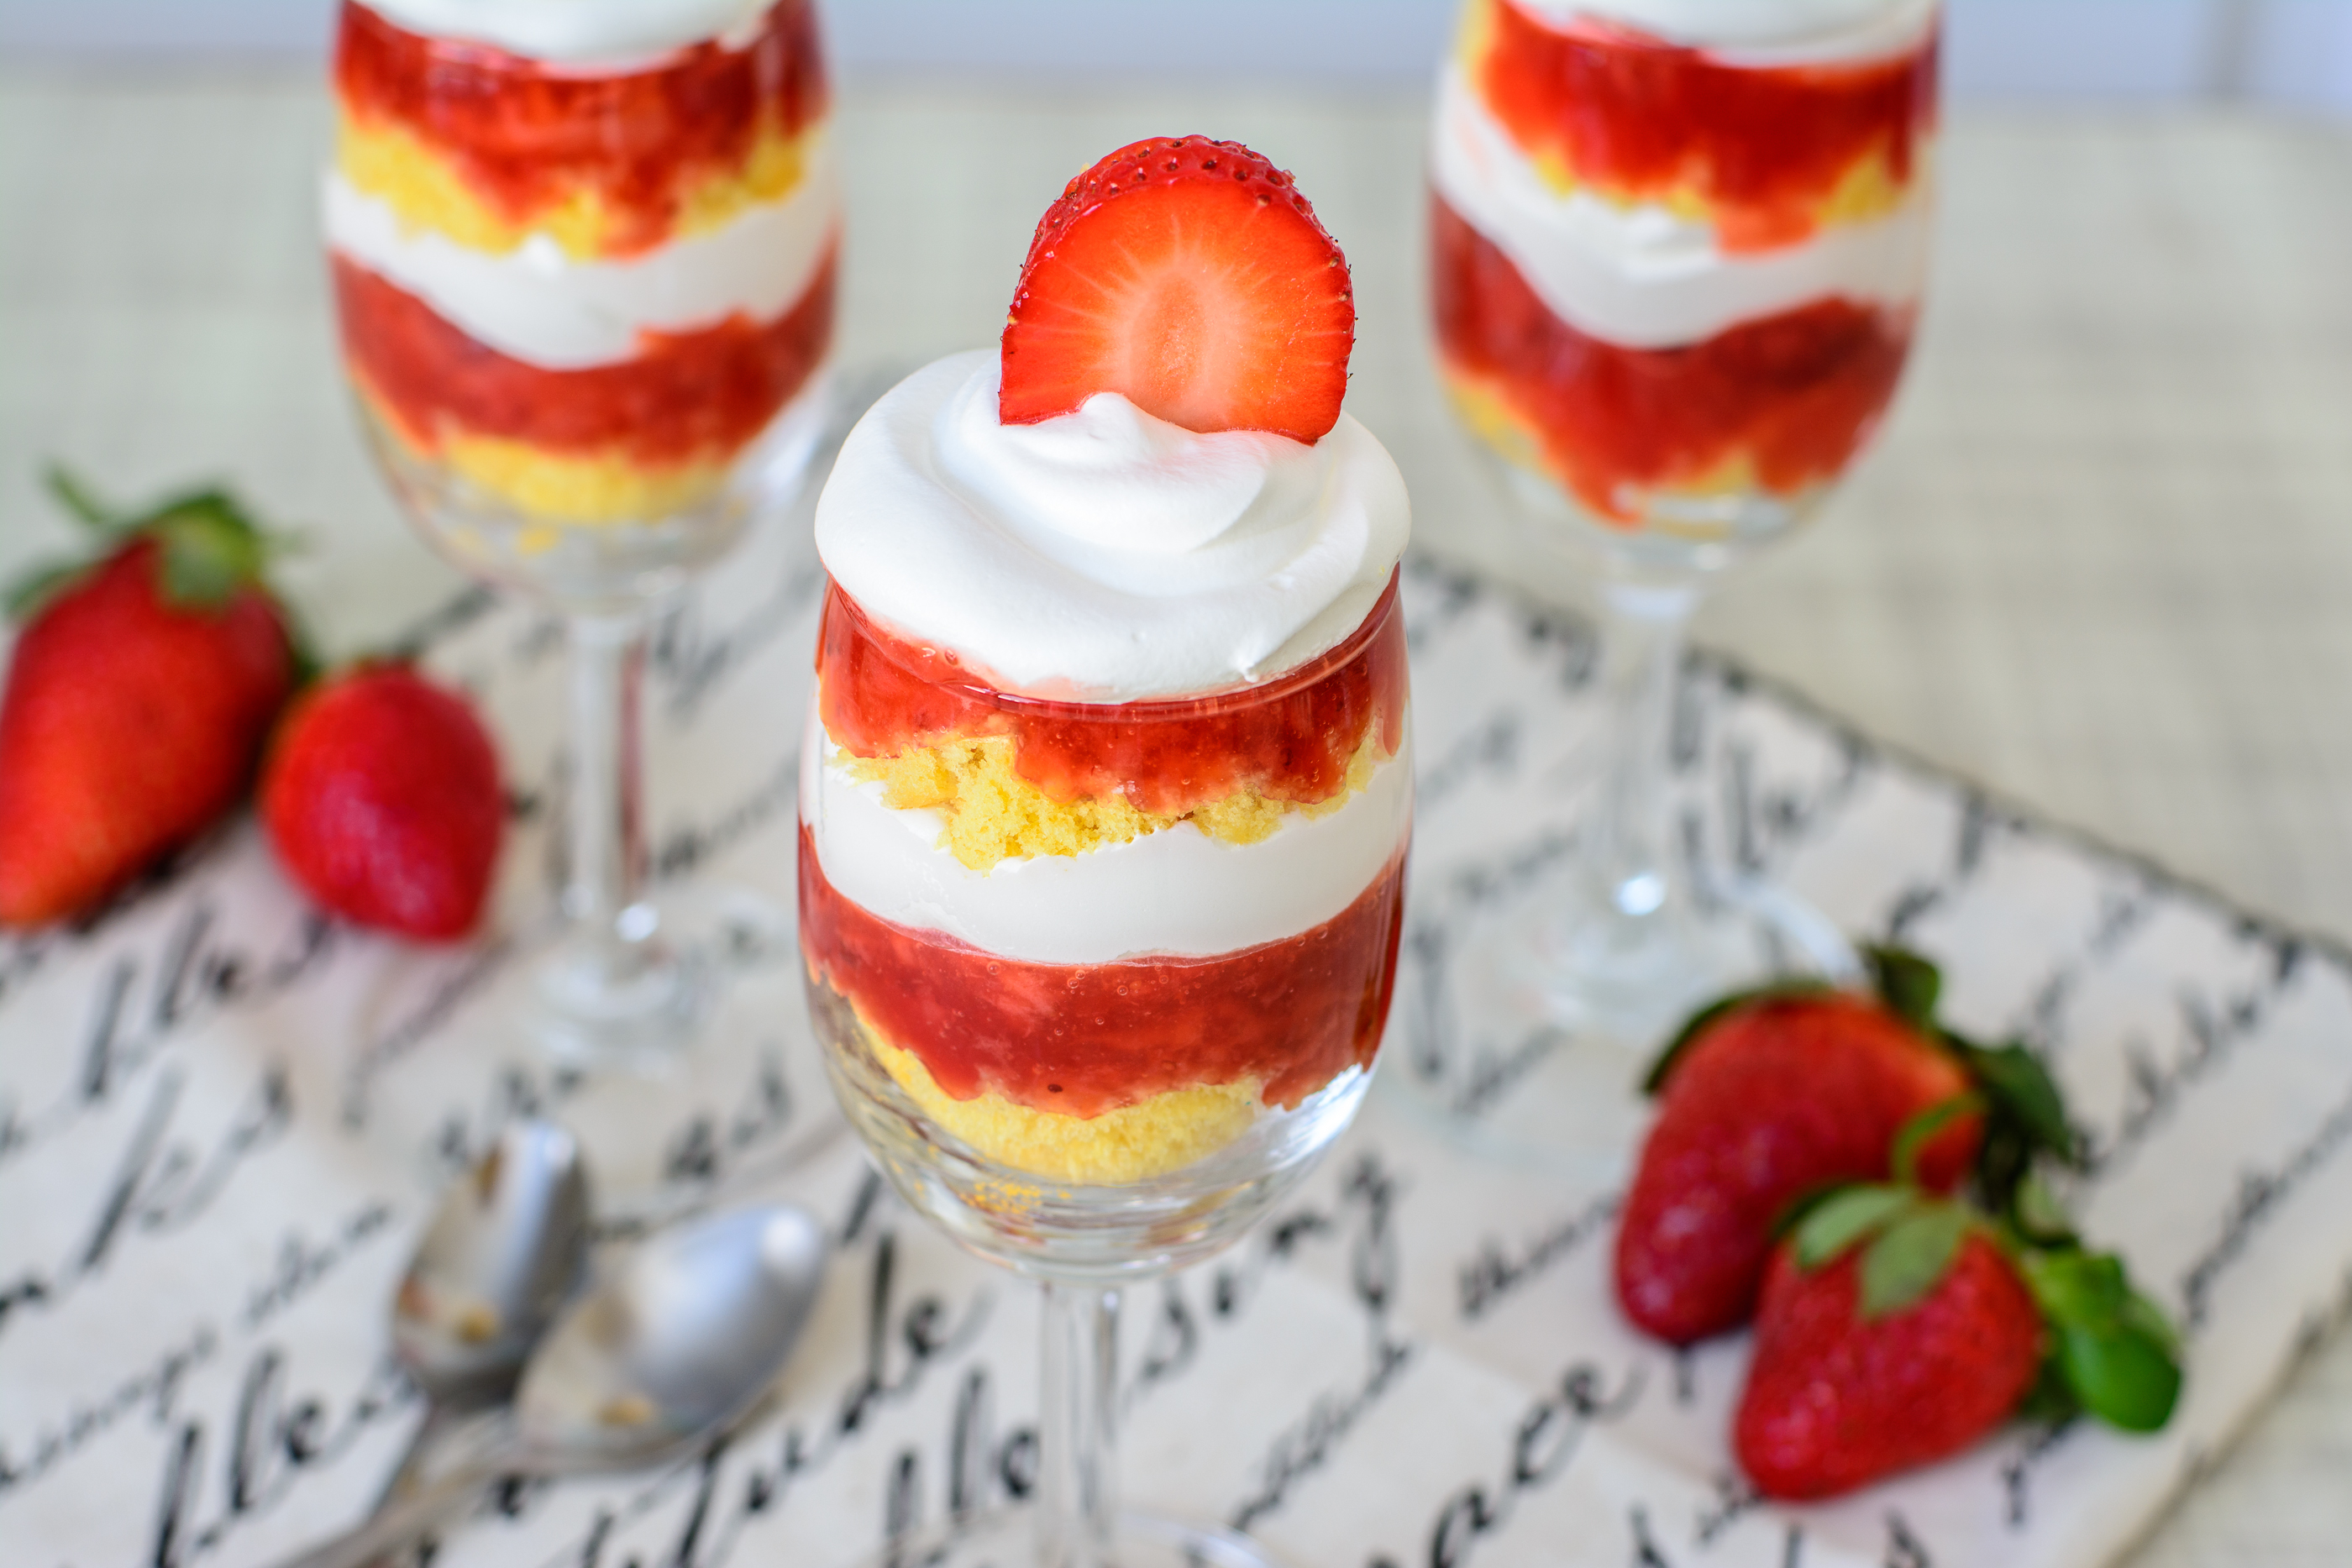 Grain Free Strawberry Shortcake Trifles. This light and delicious trifle layered with strawberry sauce, grain free shortcake and whipped cream is sure to be a hit with the whole family!